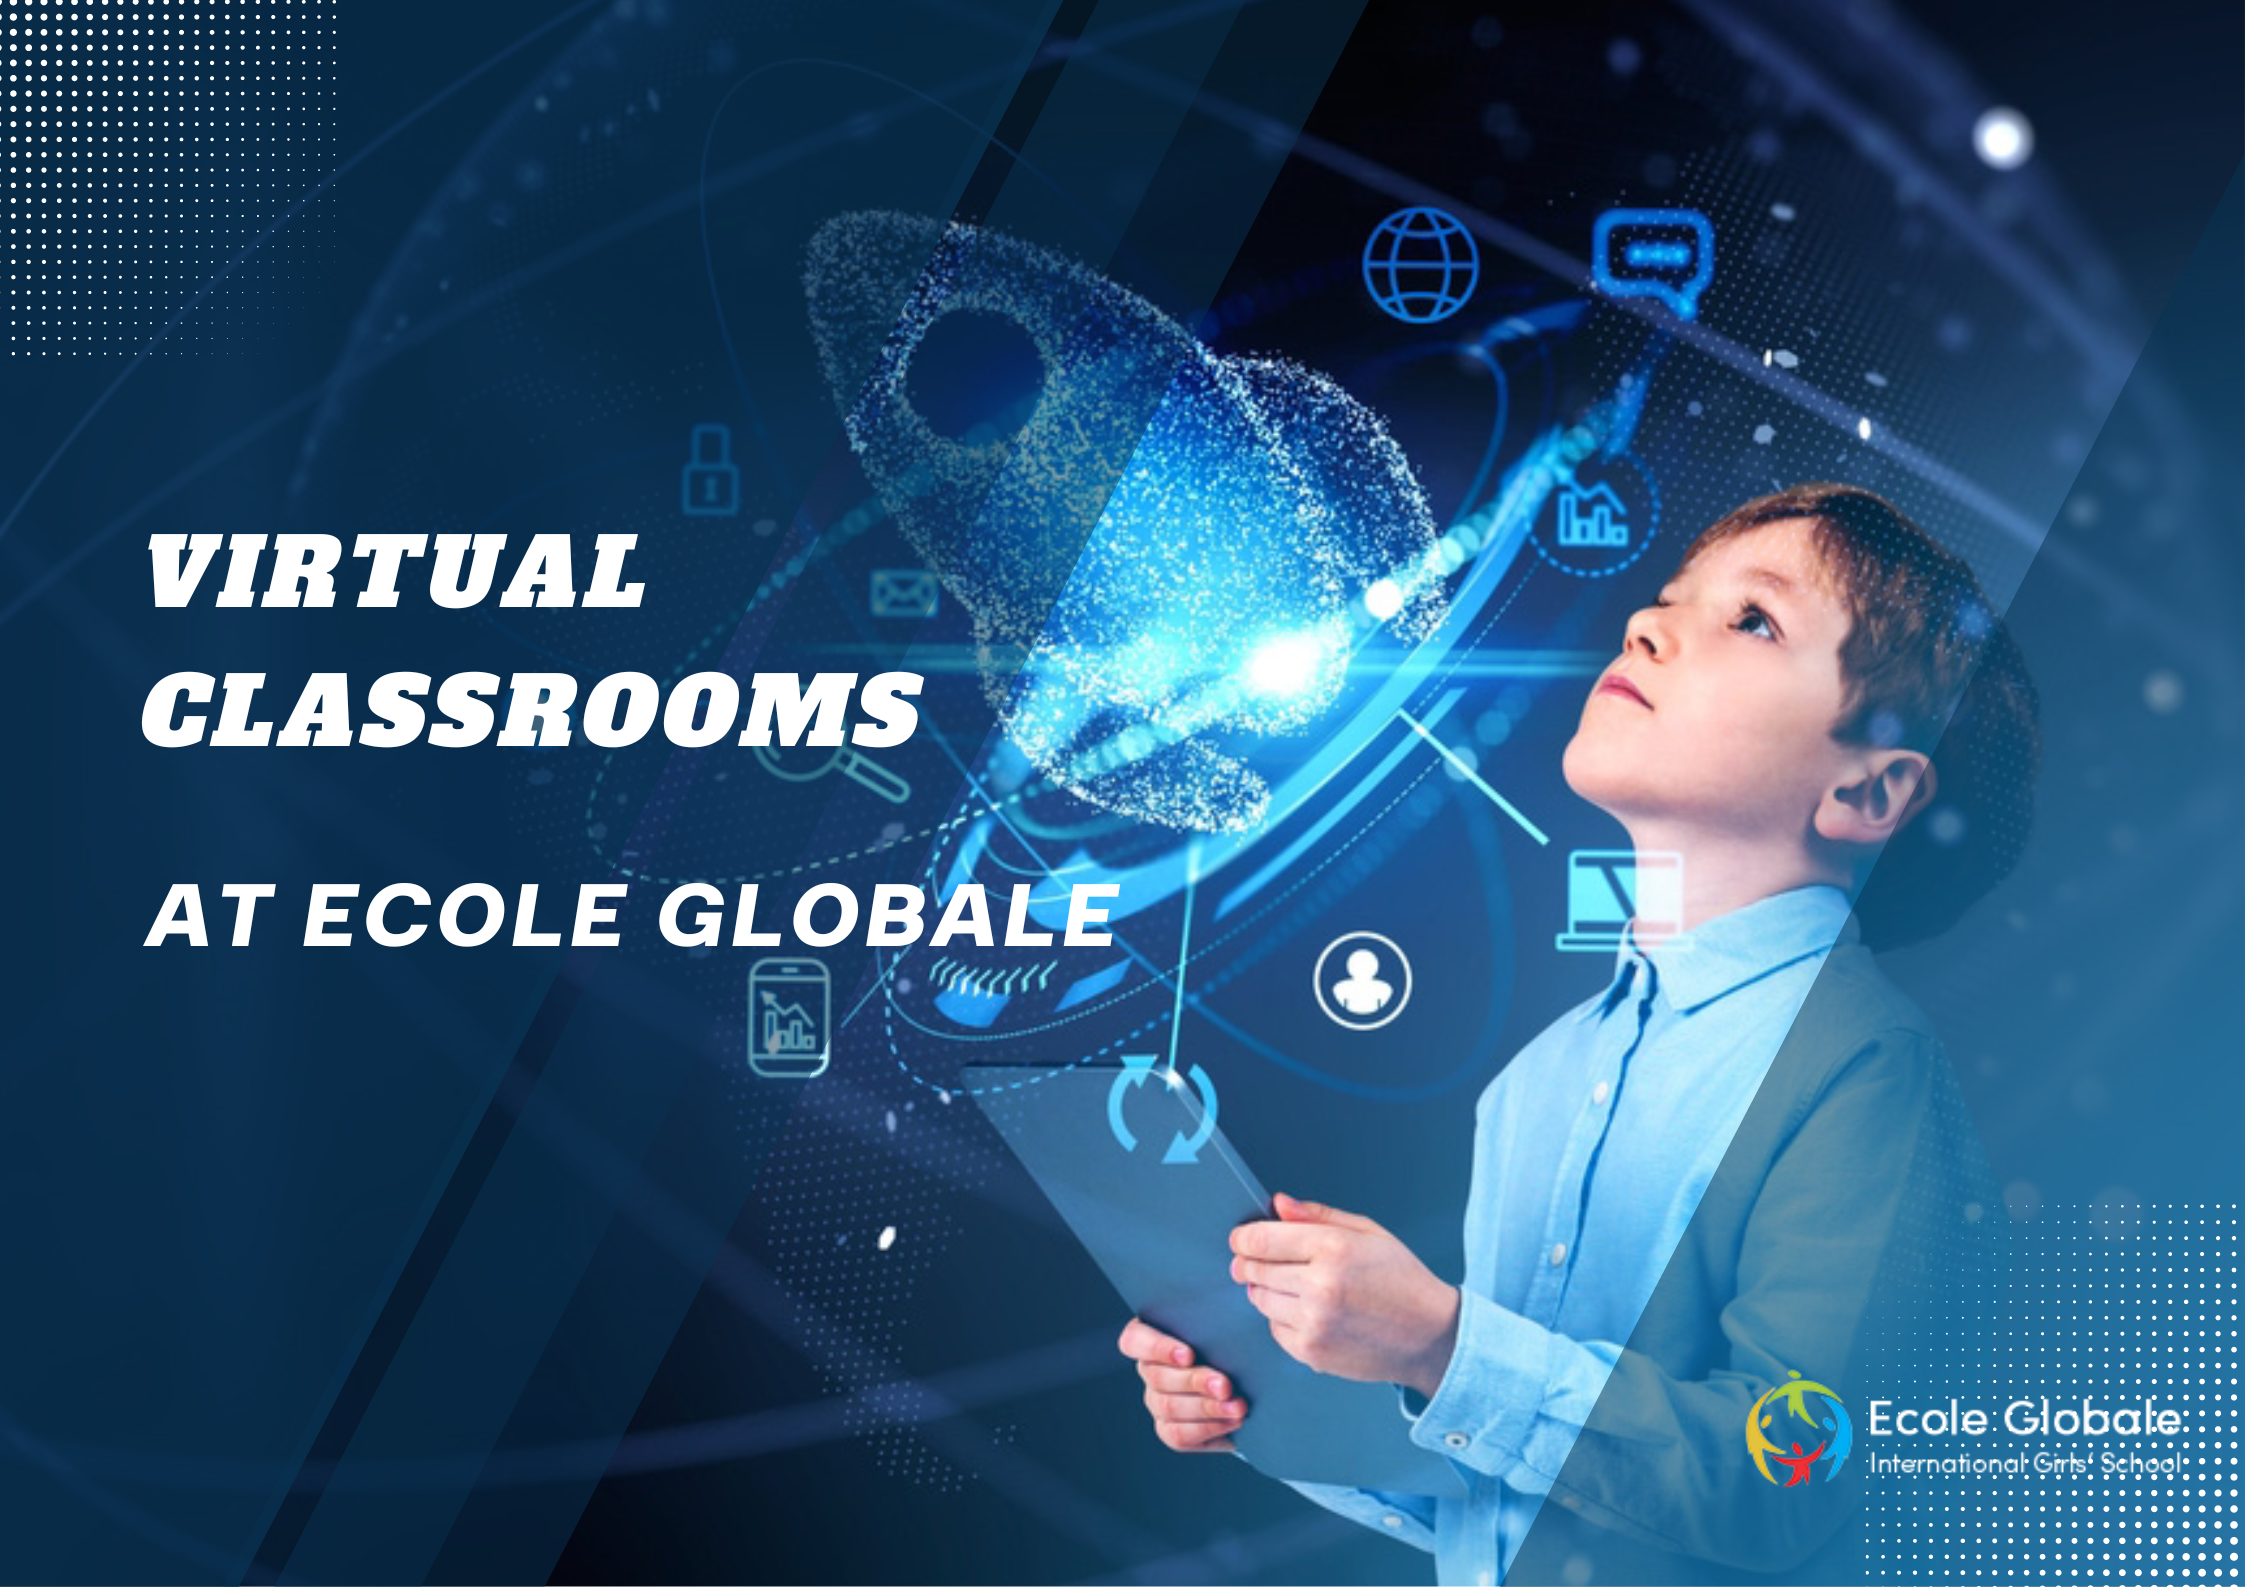 You are currently viewing Collaborative Learning Across Continents: Ecole Globale’s Virtual Classrooms